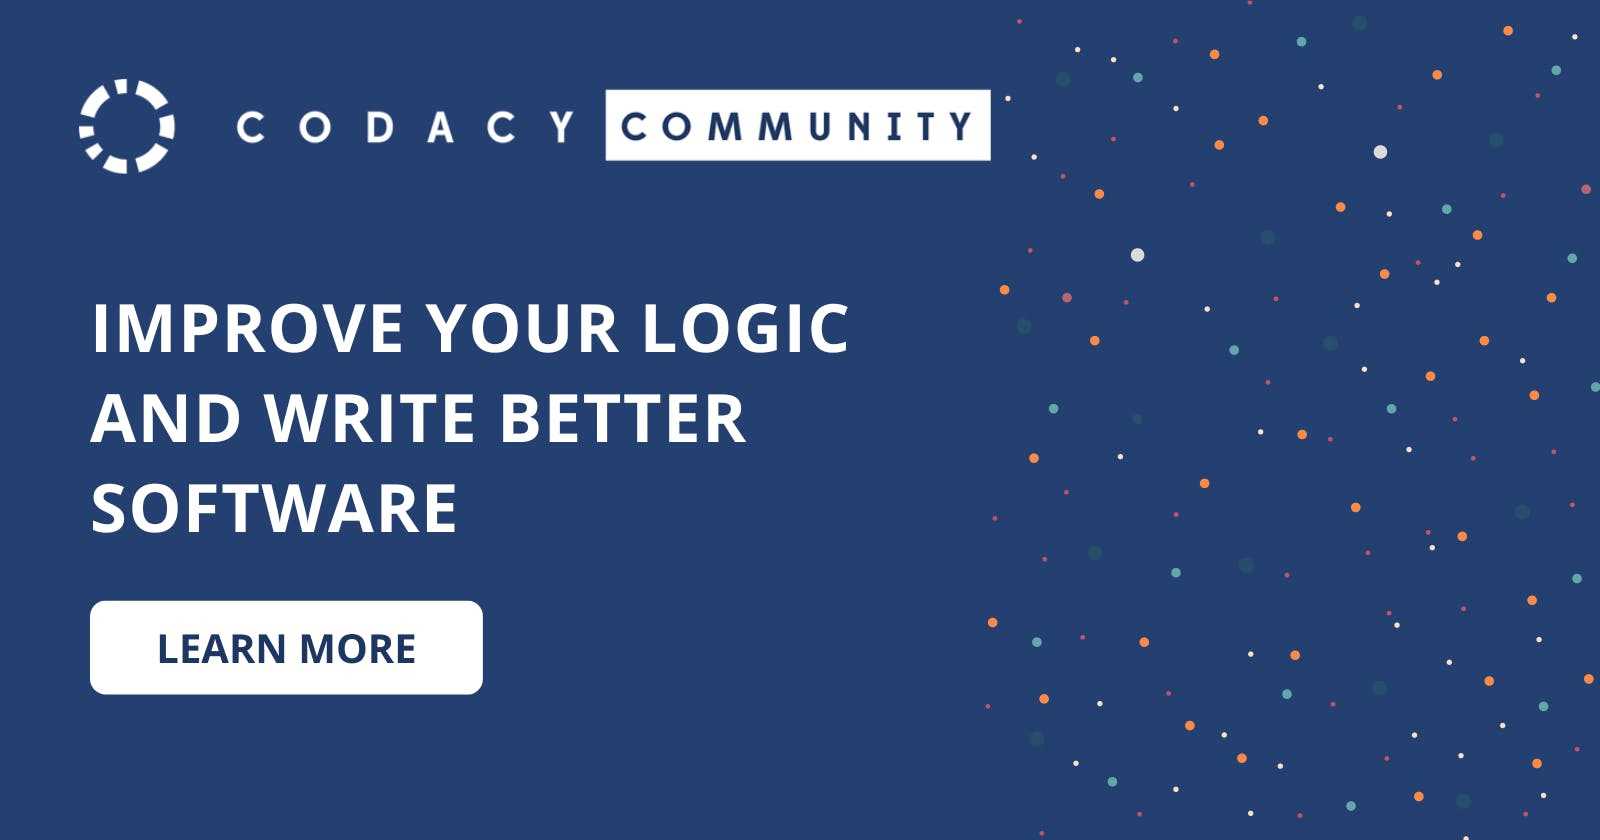 Improve your logic and write better software